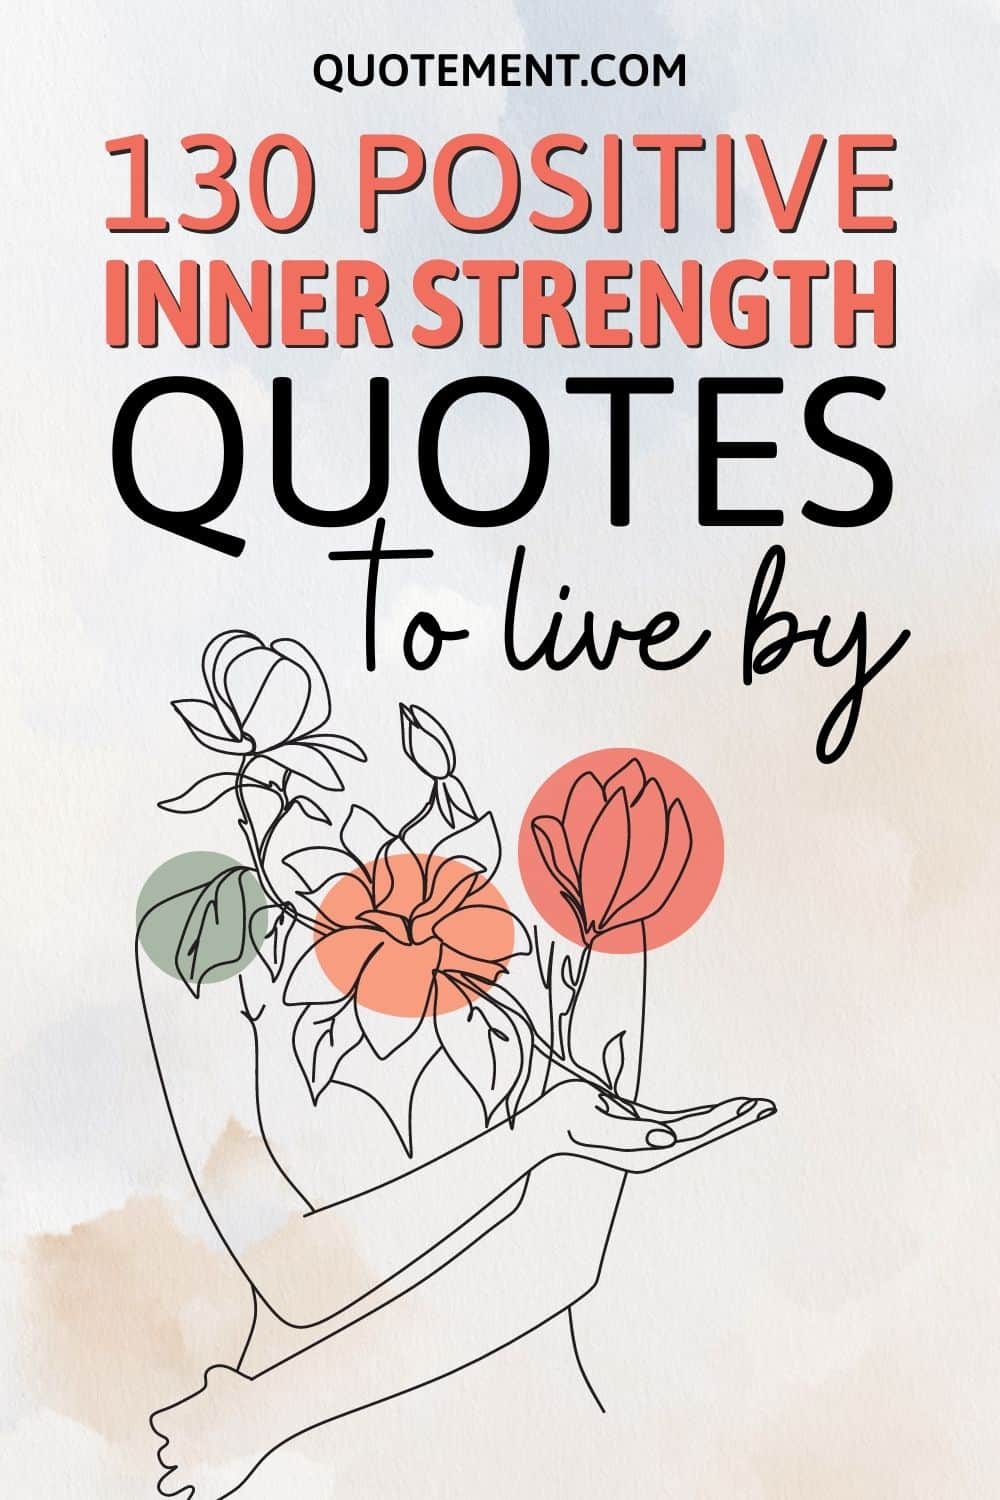 130 Best Positive Inner Strength Quotes To Build You Up
